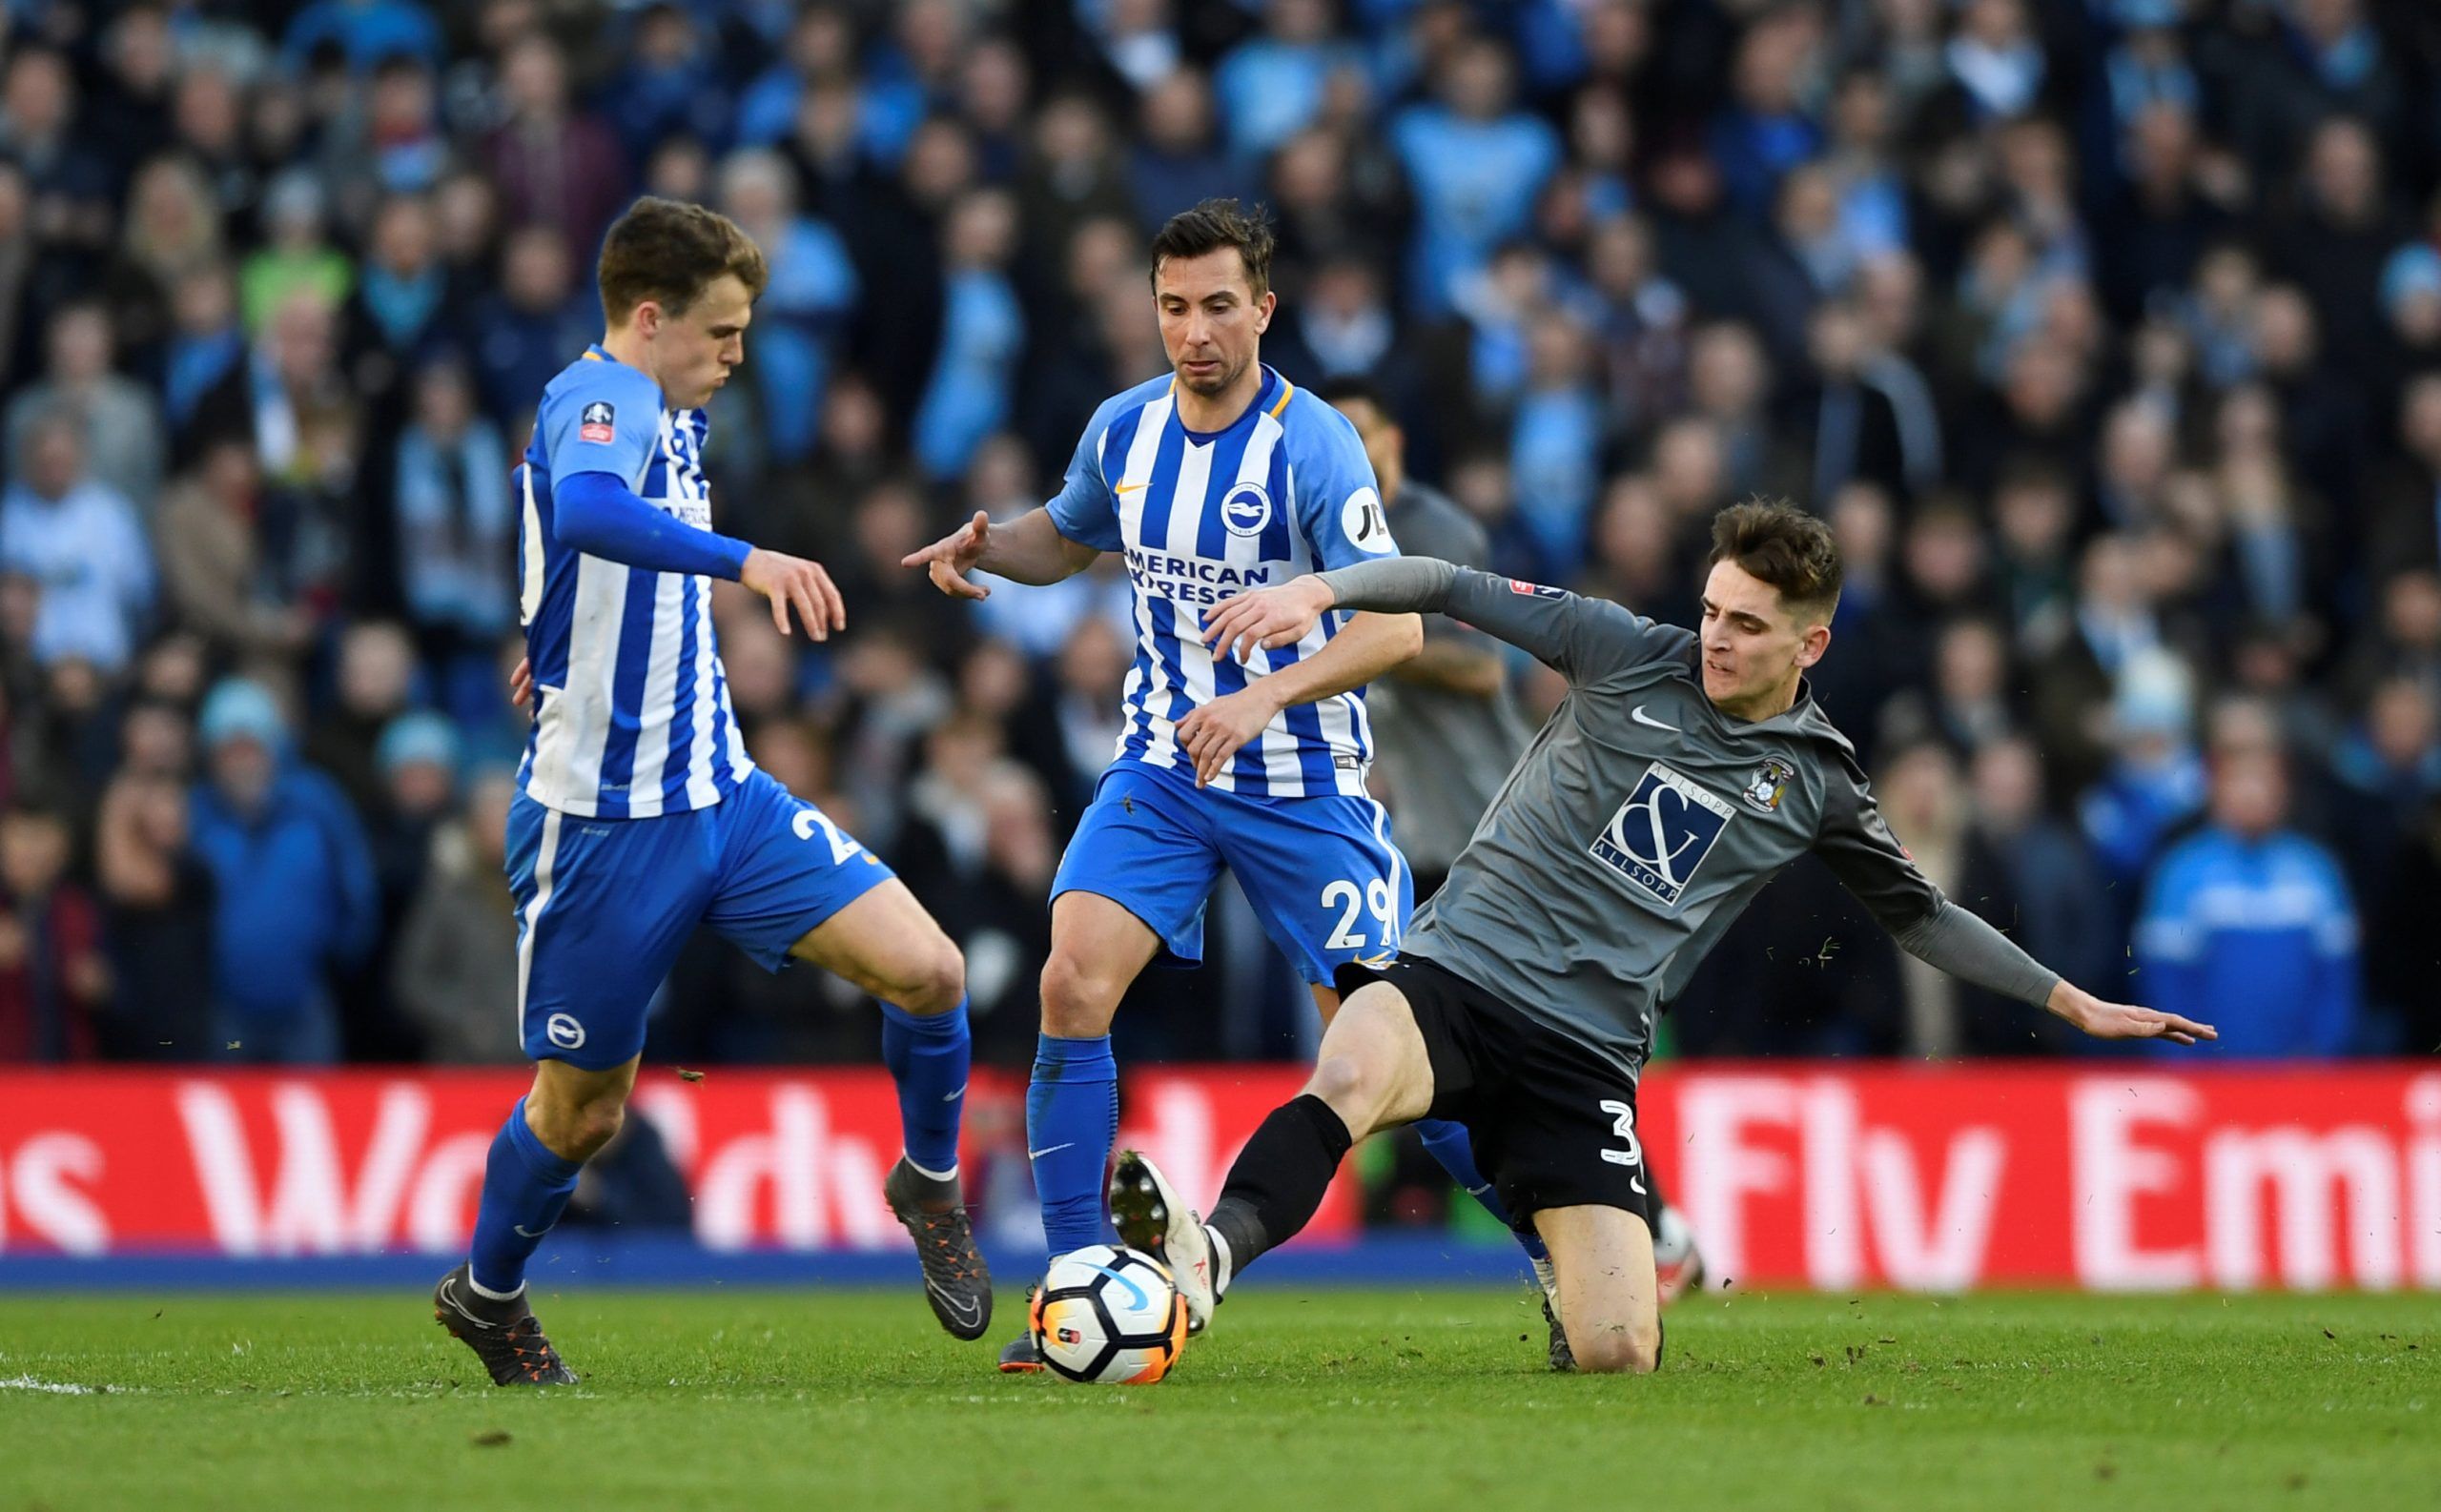 Soccer Football - FA Cup Fifth Round - Brighton &amp; Hove Albion vs Coventry City - The American Express Community Stadium, Brighton, Britain - February 17, 2018   Brighton’s Solly March and Markus Suttner in action with Coventry City’s Tom Bayliss           Action Images via Reuters/Tony O'Brien